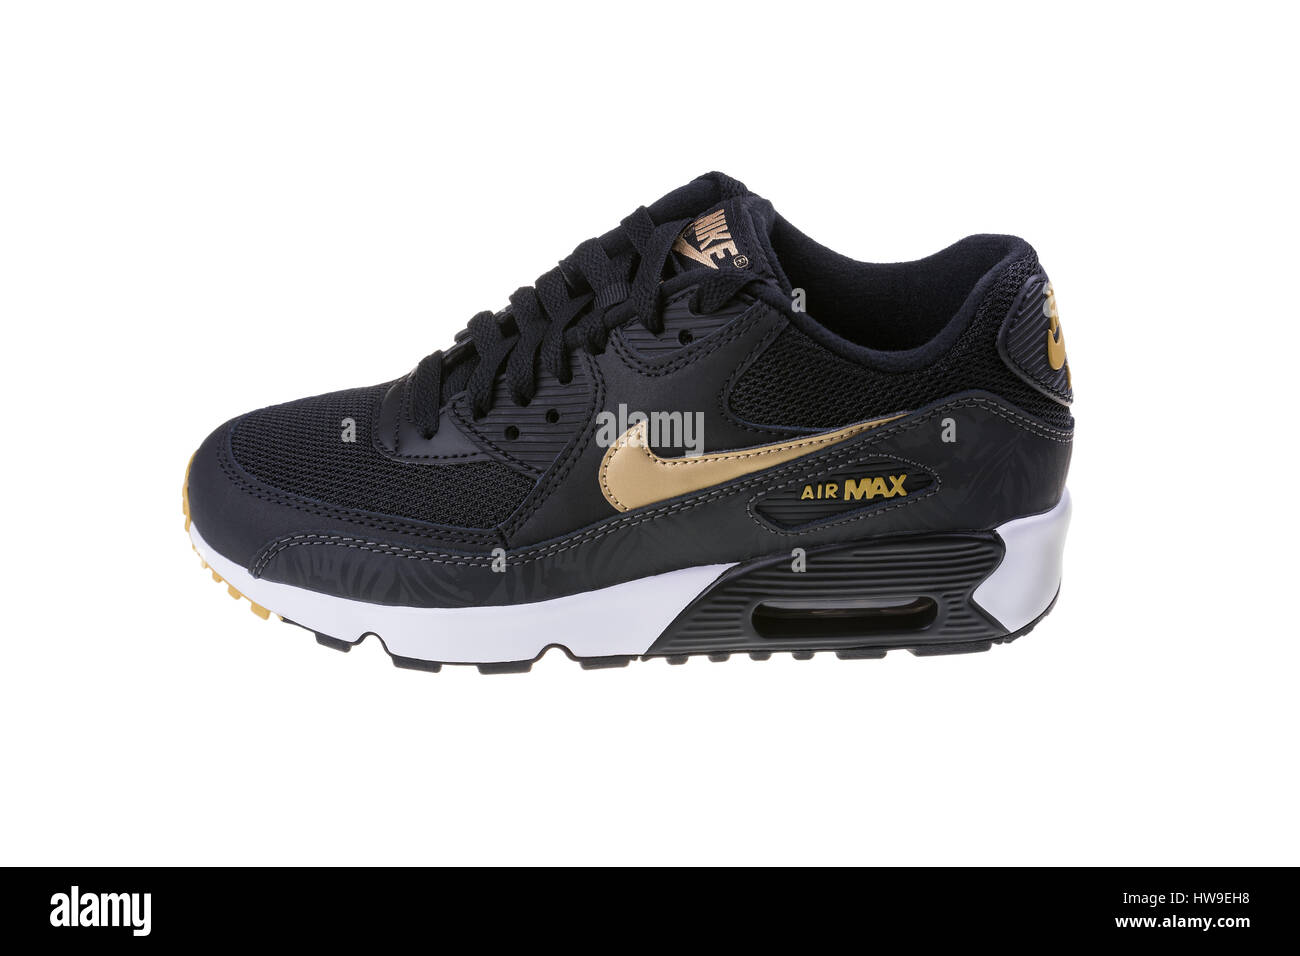 Nike Air MAX women's shoes Stock Photo 